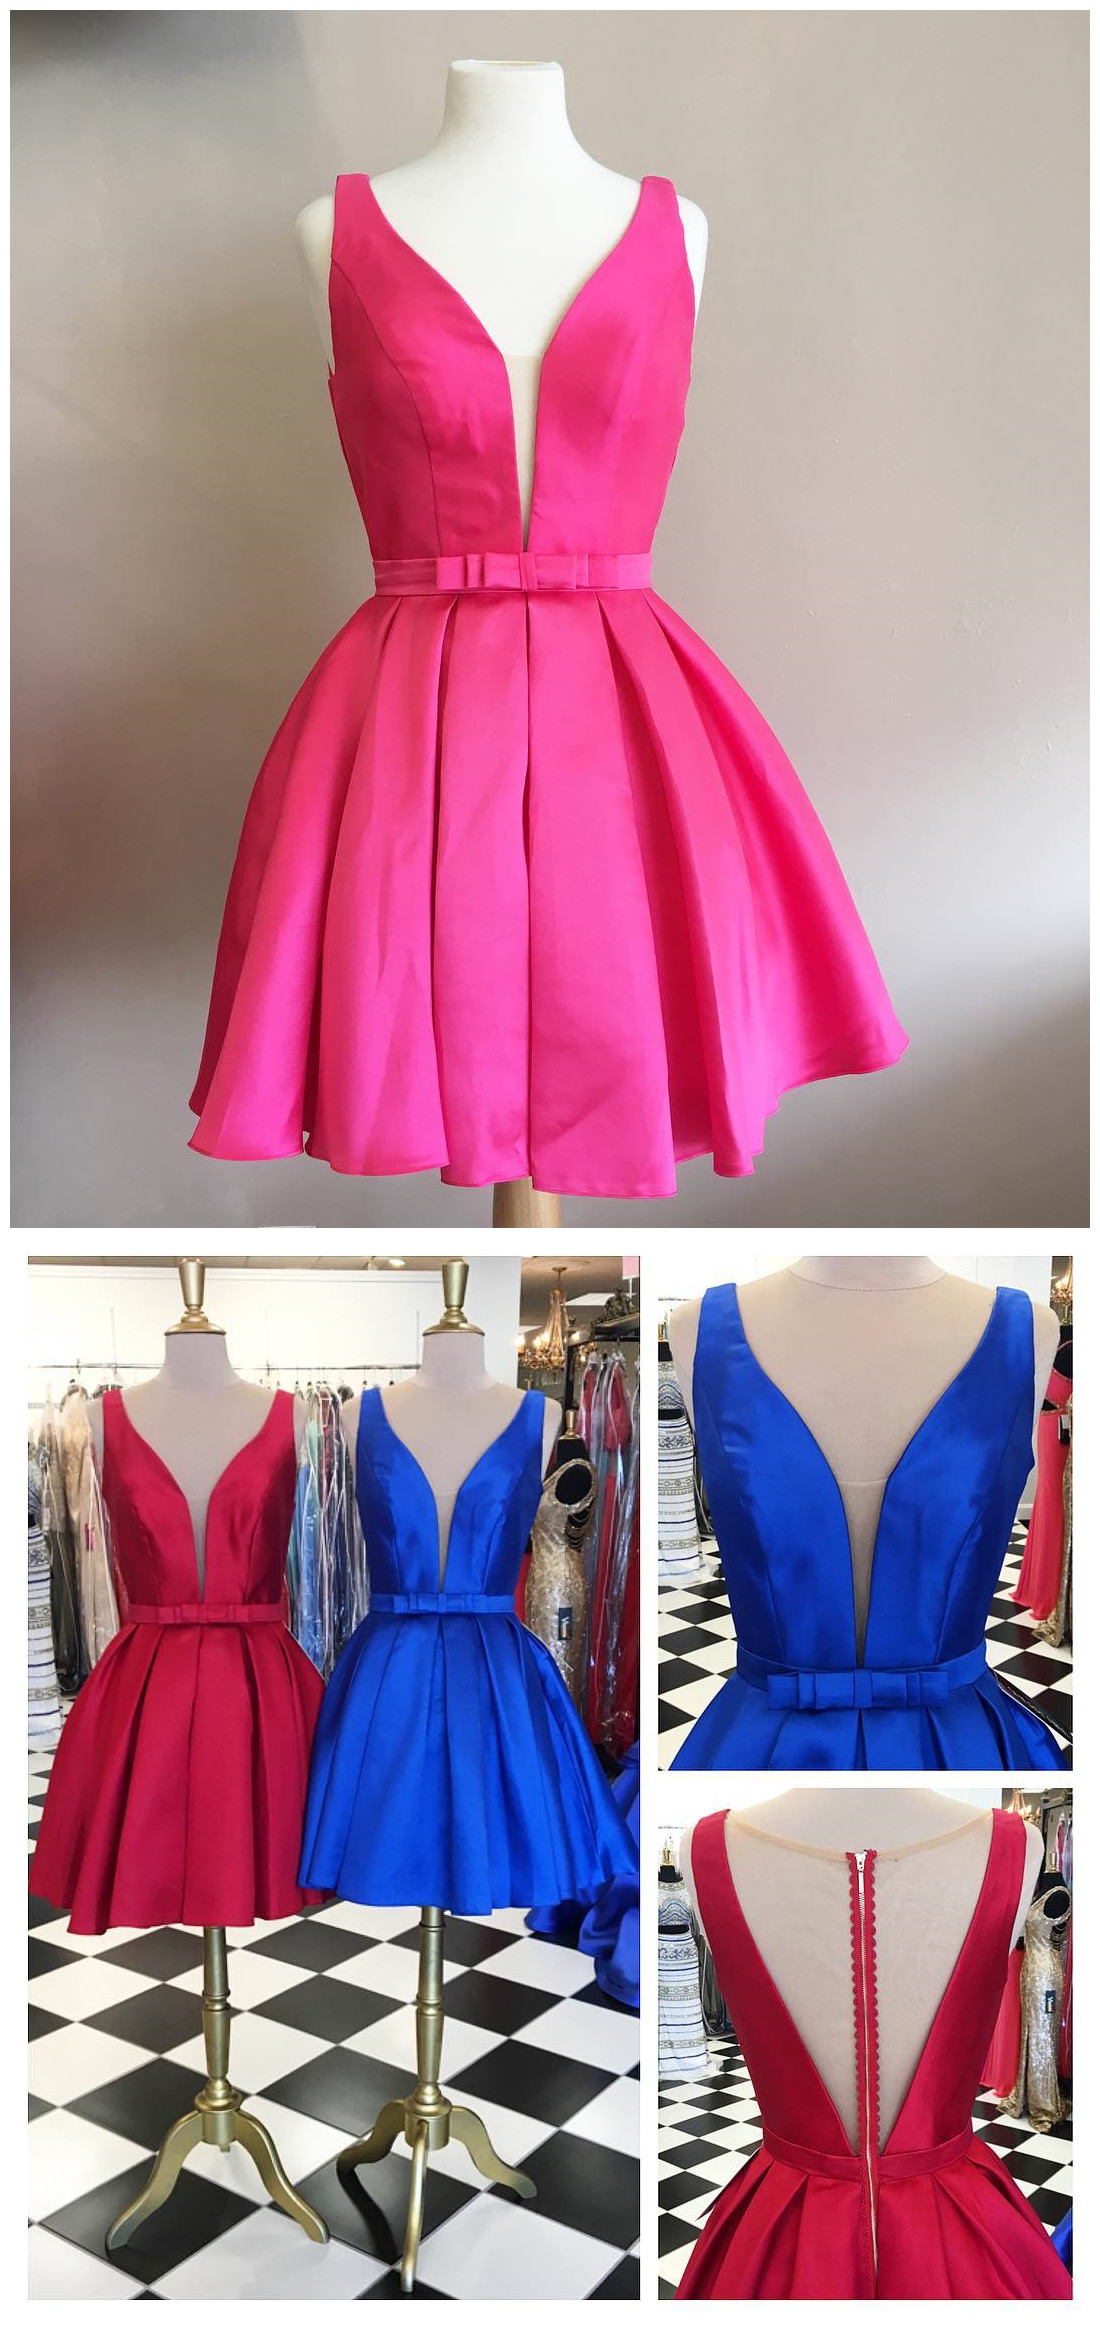 Homecoming Dress,sexy V Neck See Through Back Satin Short Homecoming Dresses 2017 Cocktail Party Dresses